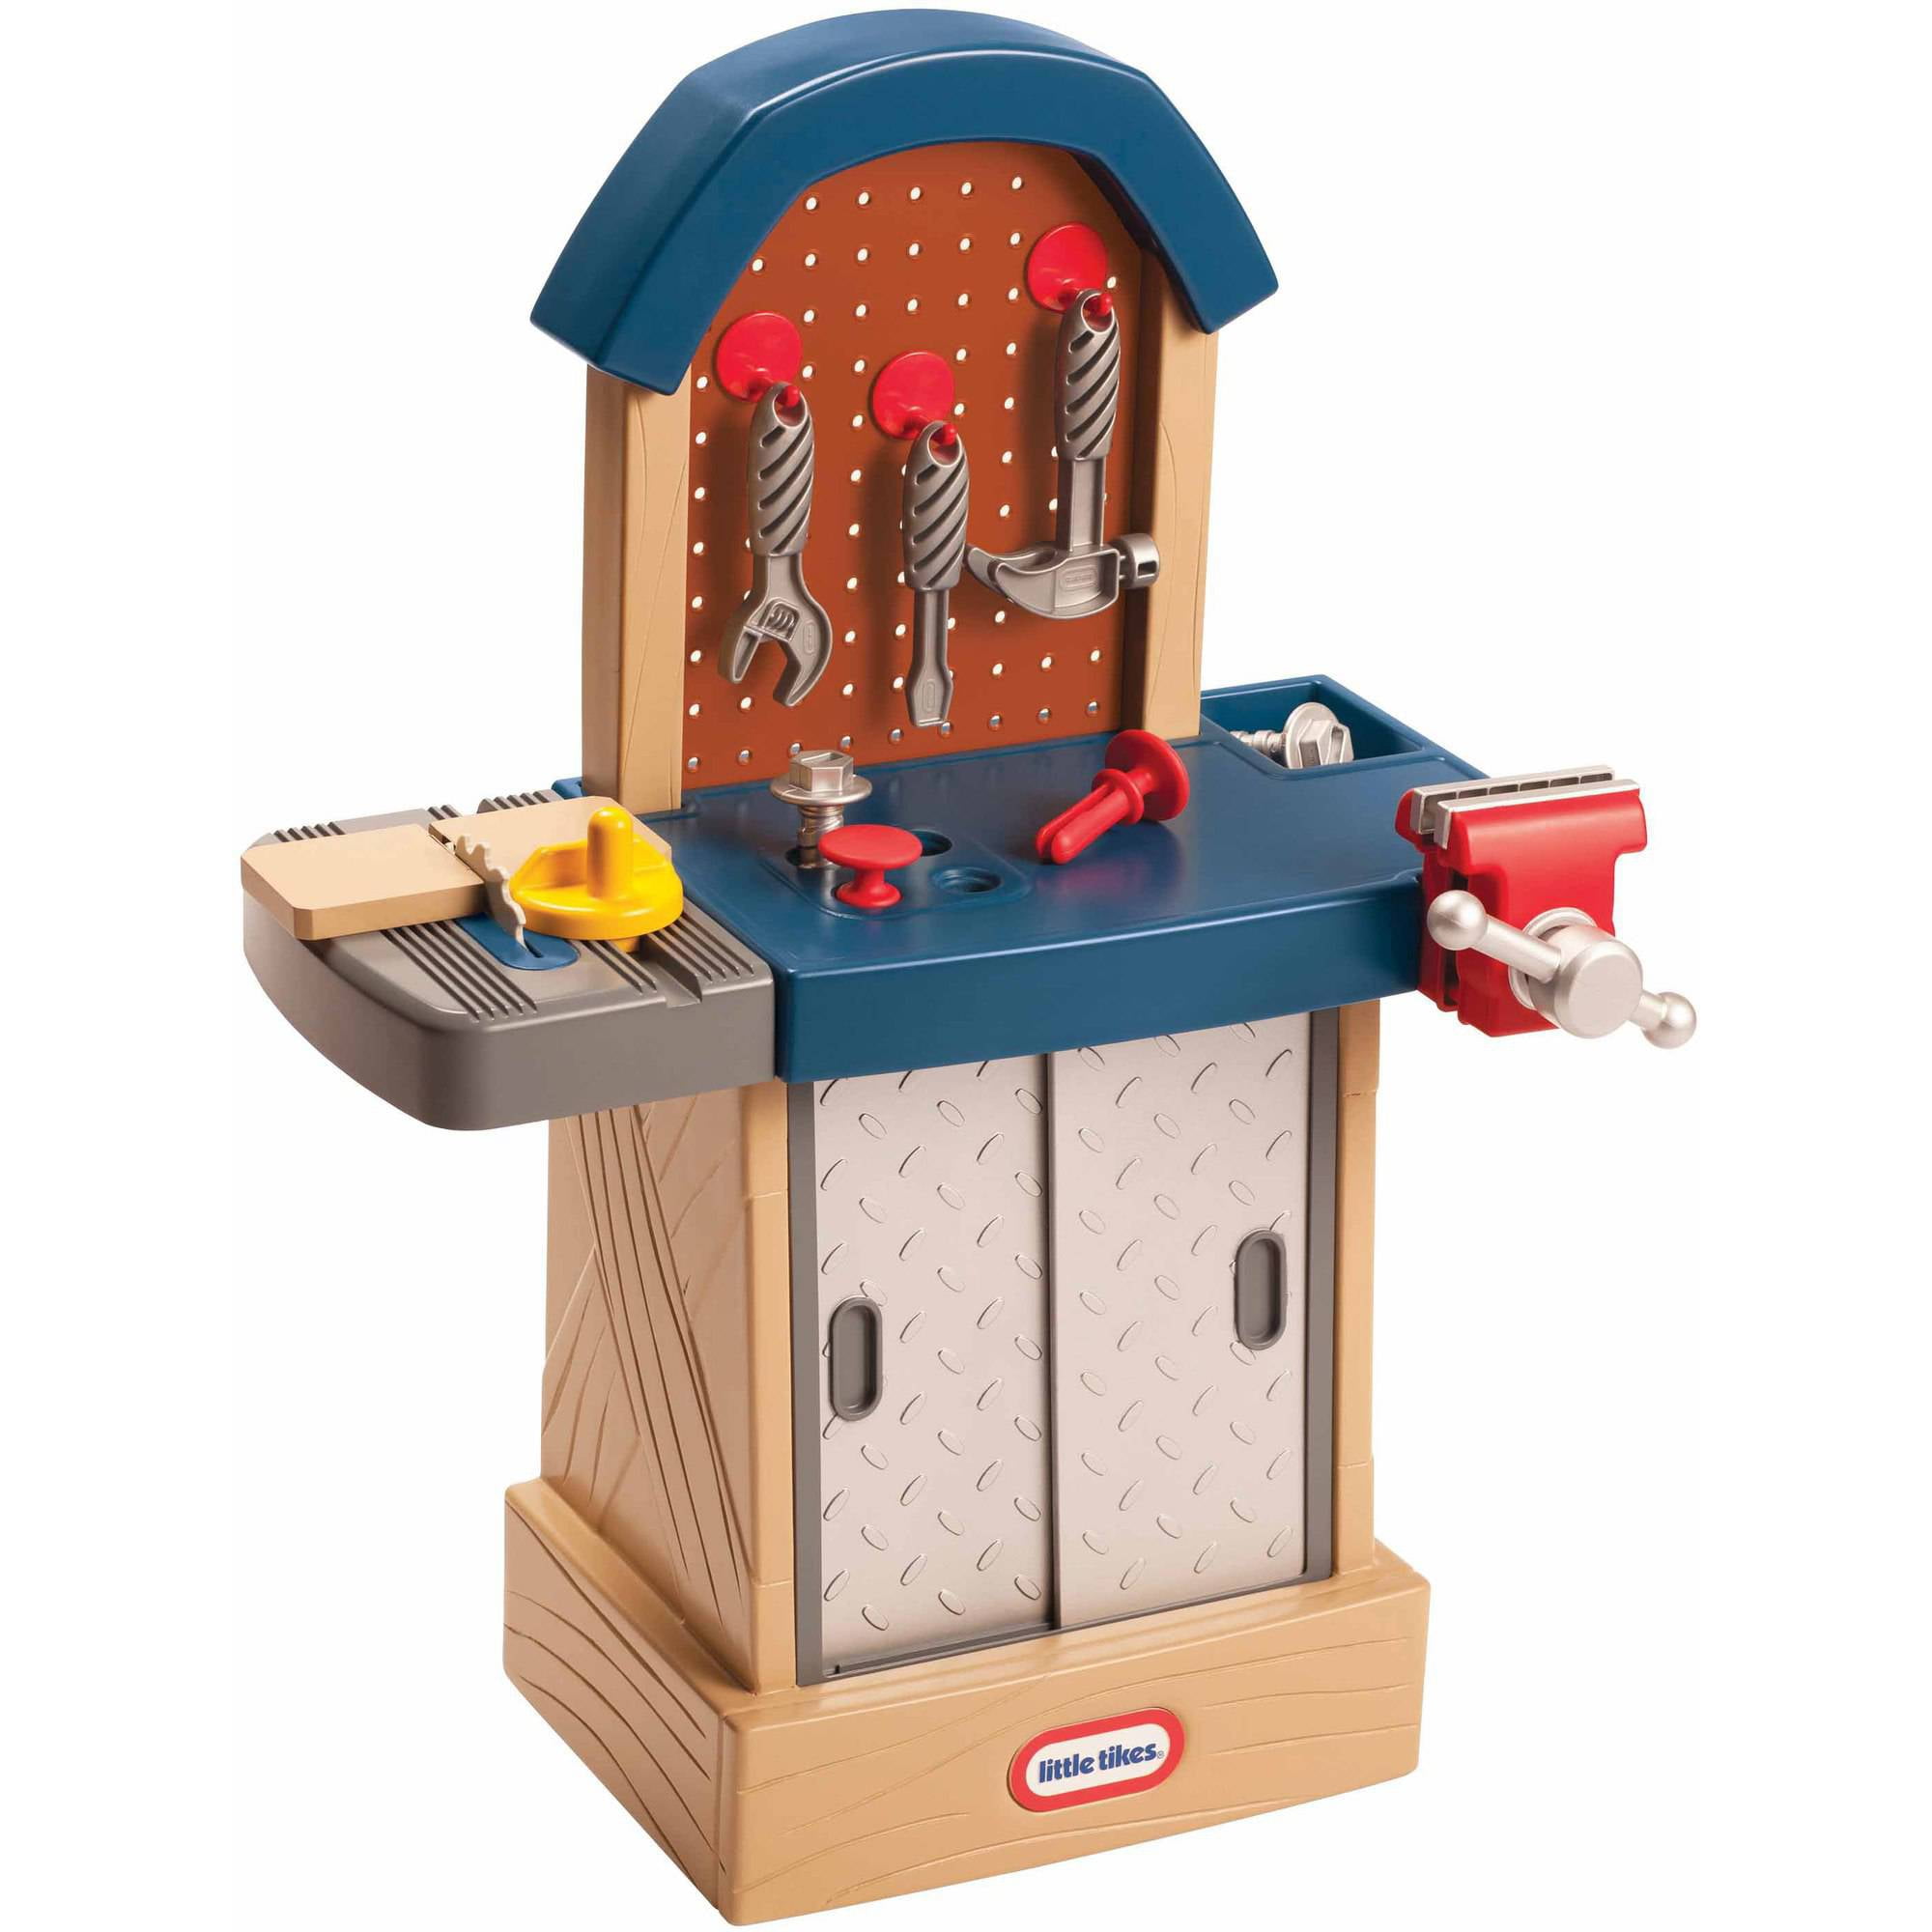 Construction Tool Playset Toys Wooden Play Tool Workbench Set for Kids Toddlers 